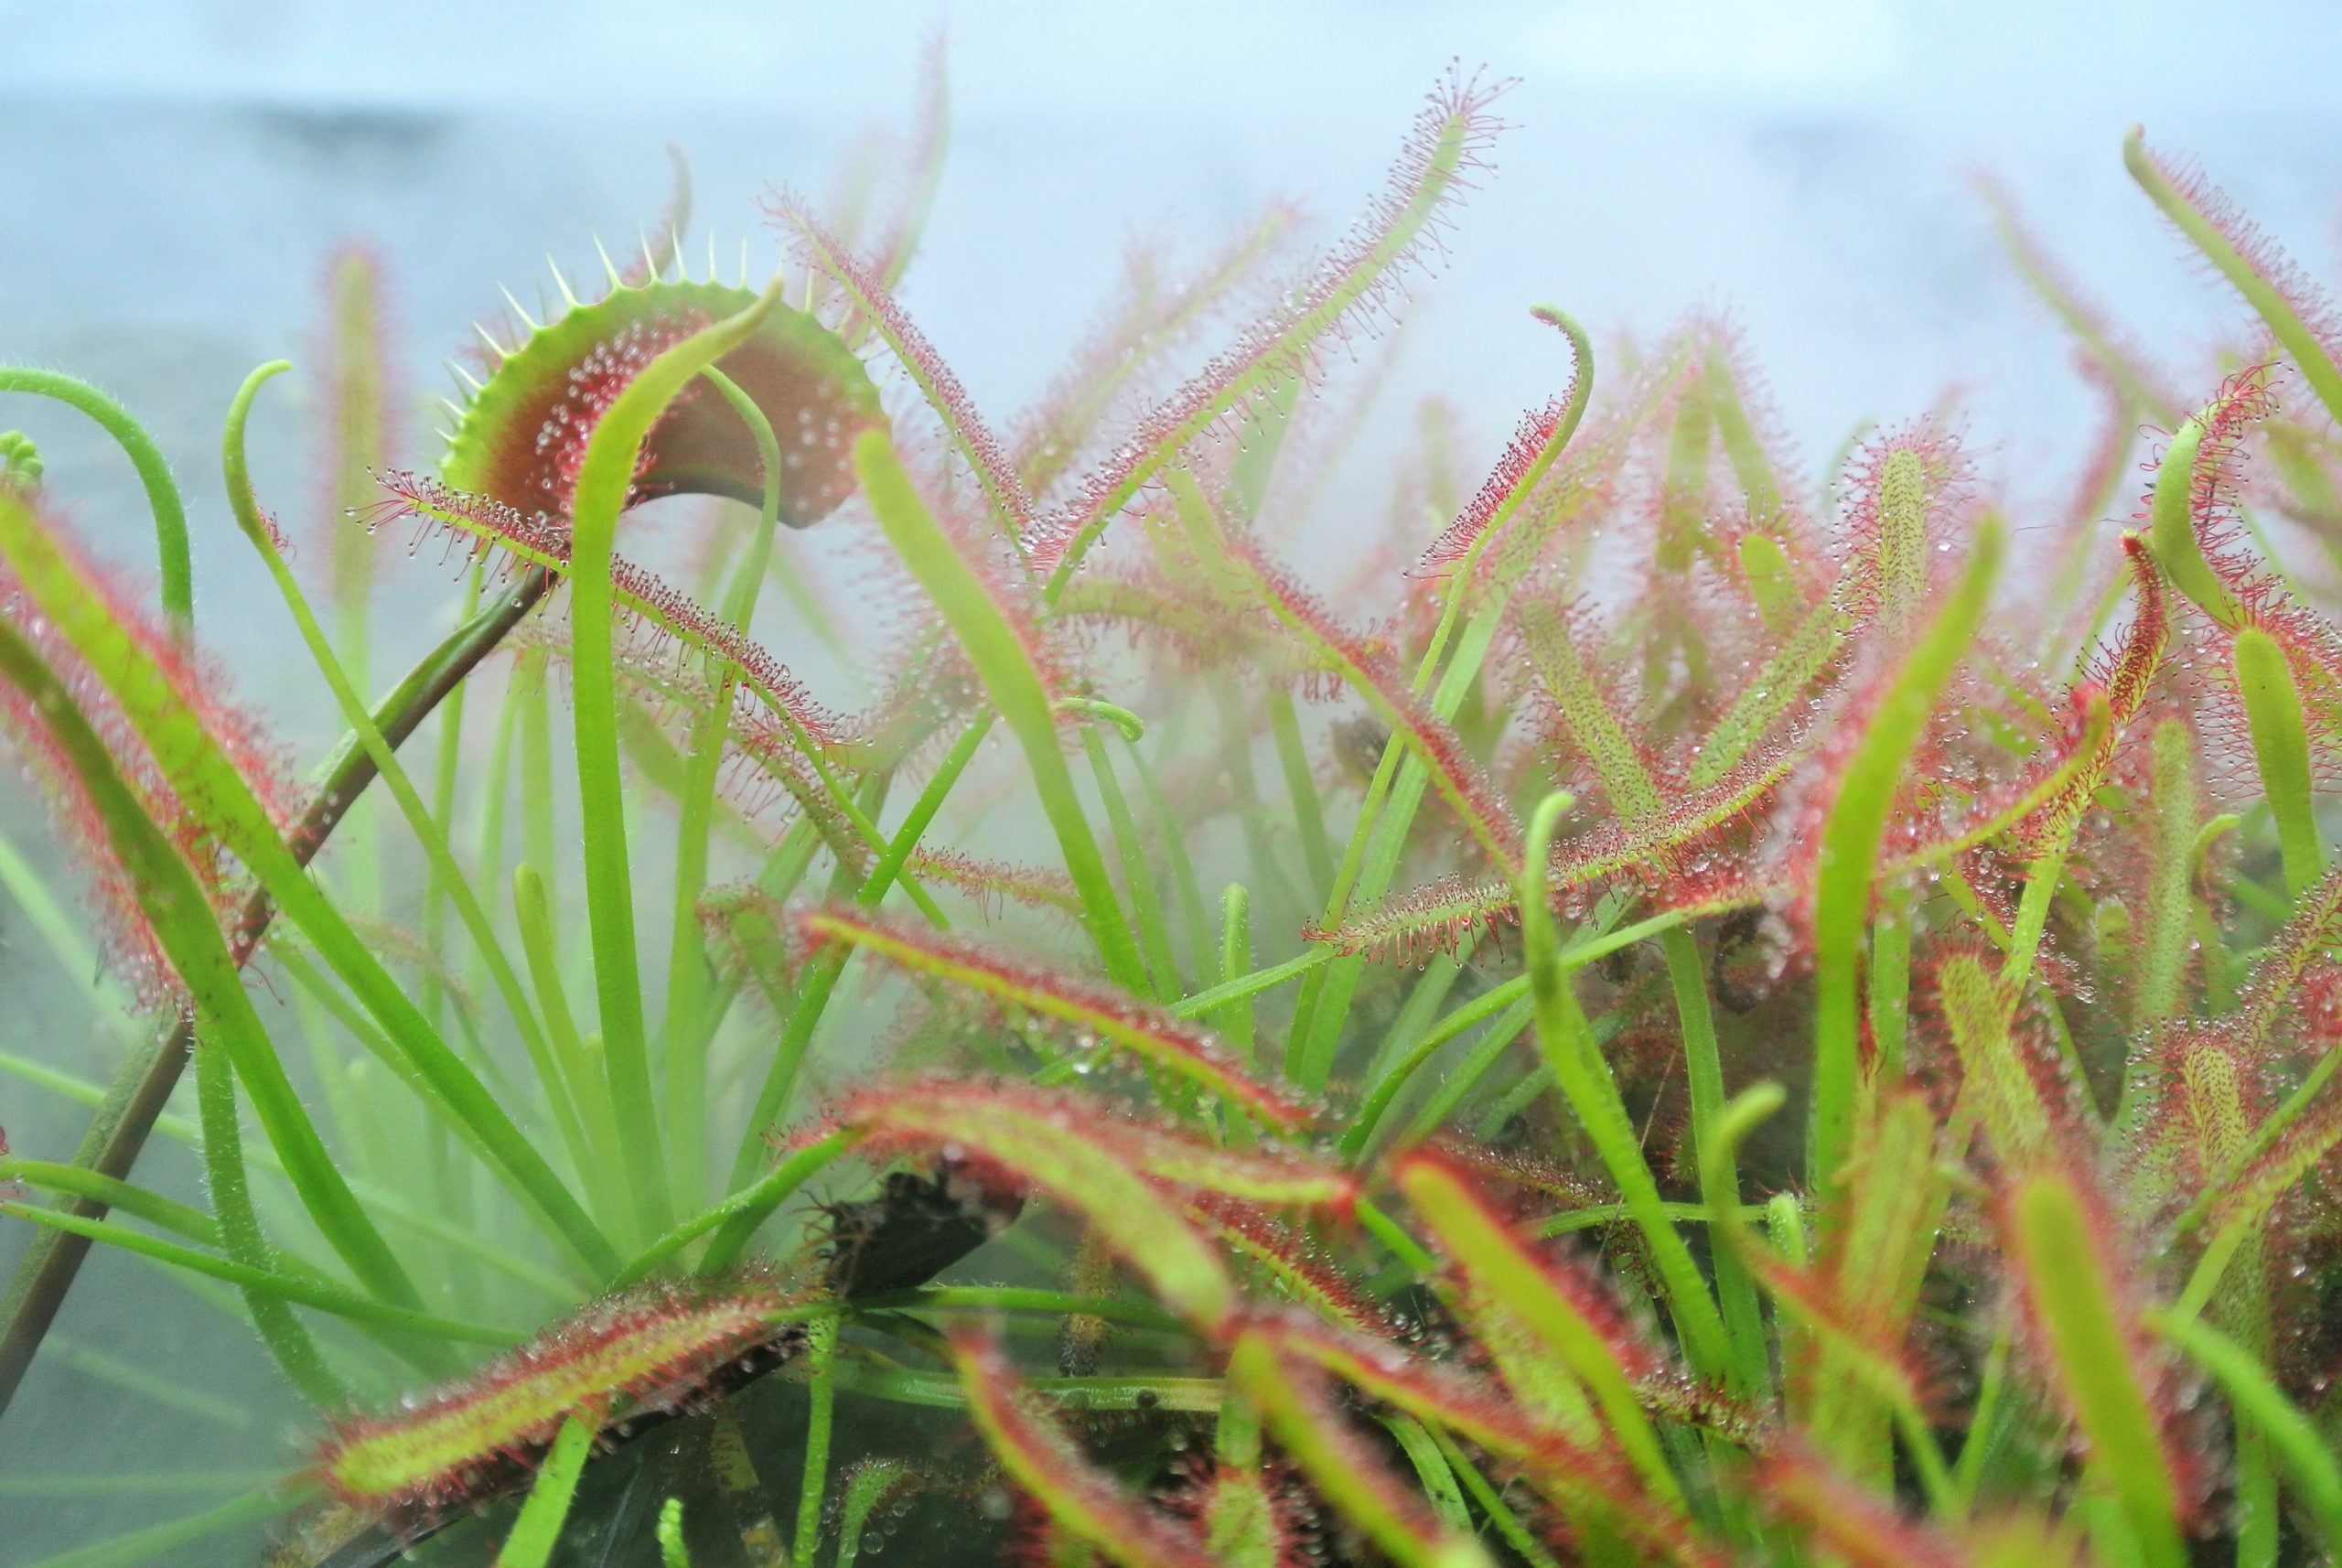 Misty view of sundew plants with pink sticky hairs on green leaves. One Venus flytrap leaf hidden among the sundew leaves.